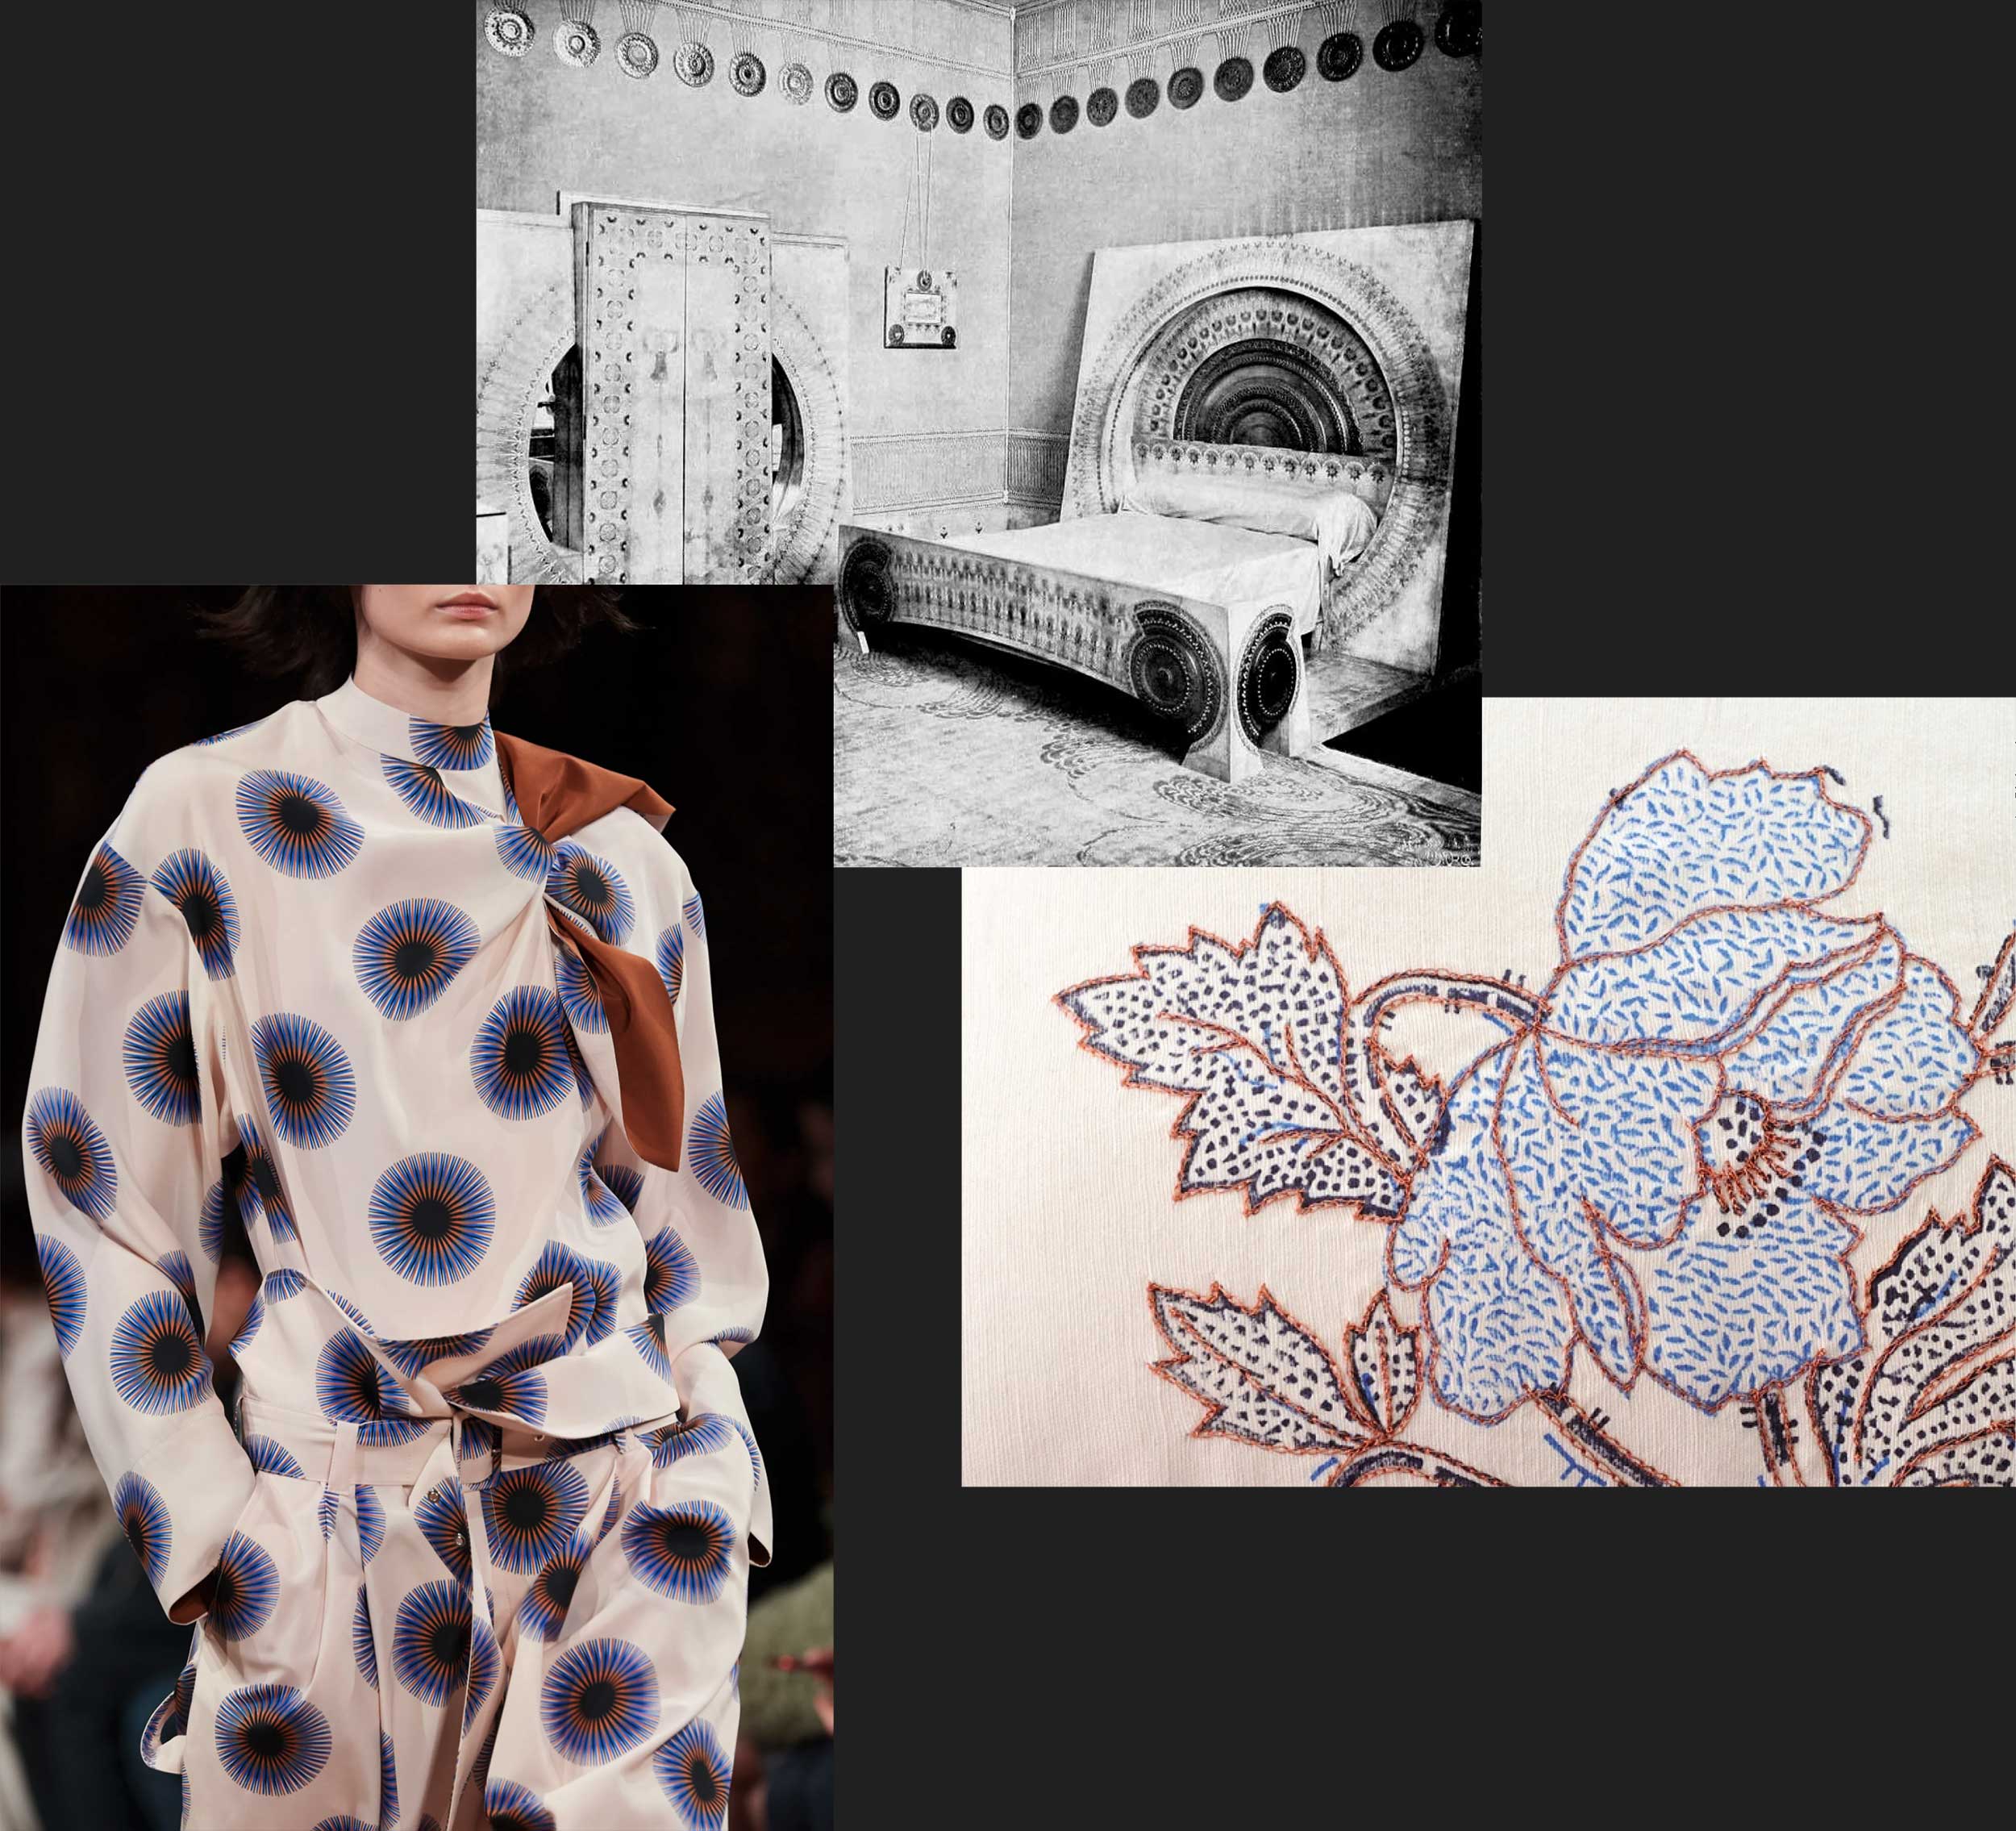 Image collage of home interior, fashion model wearing dress, and textile detail